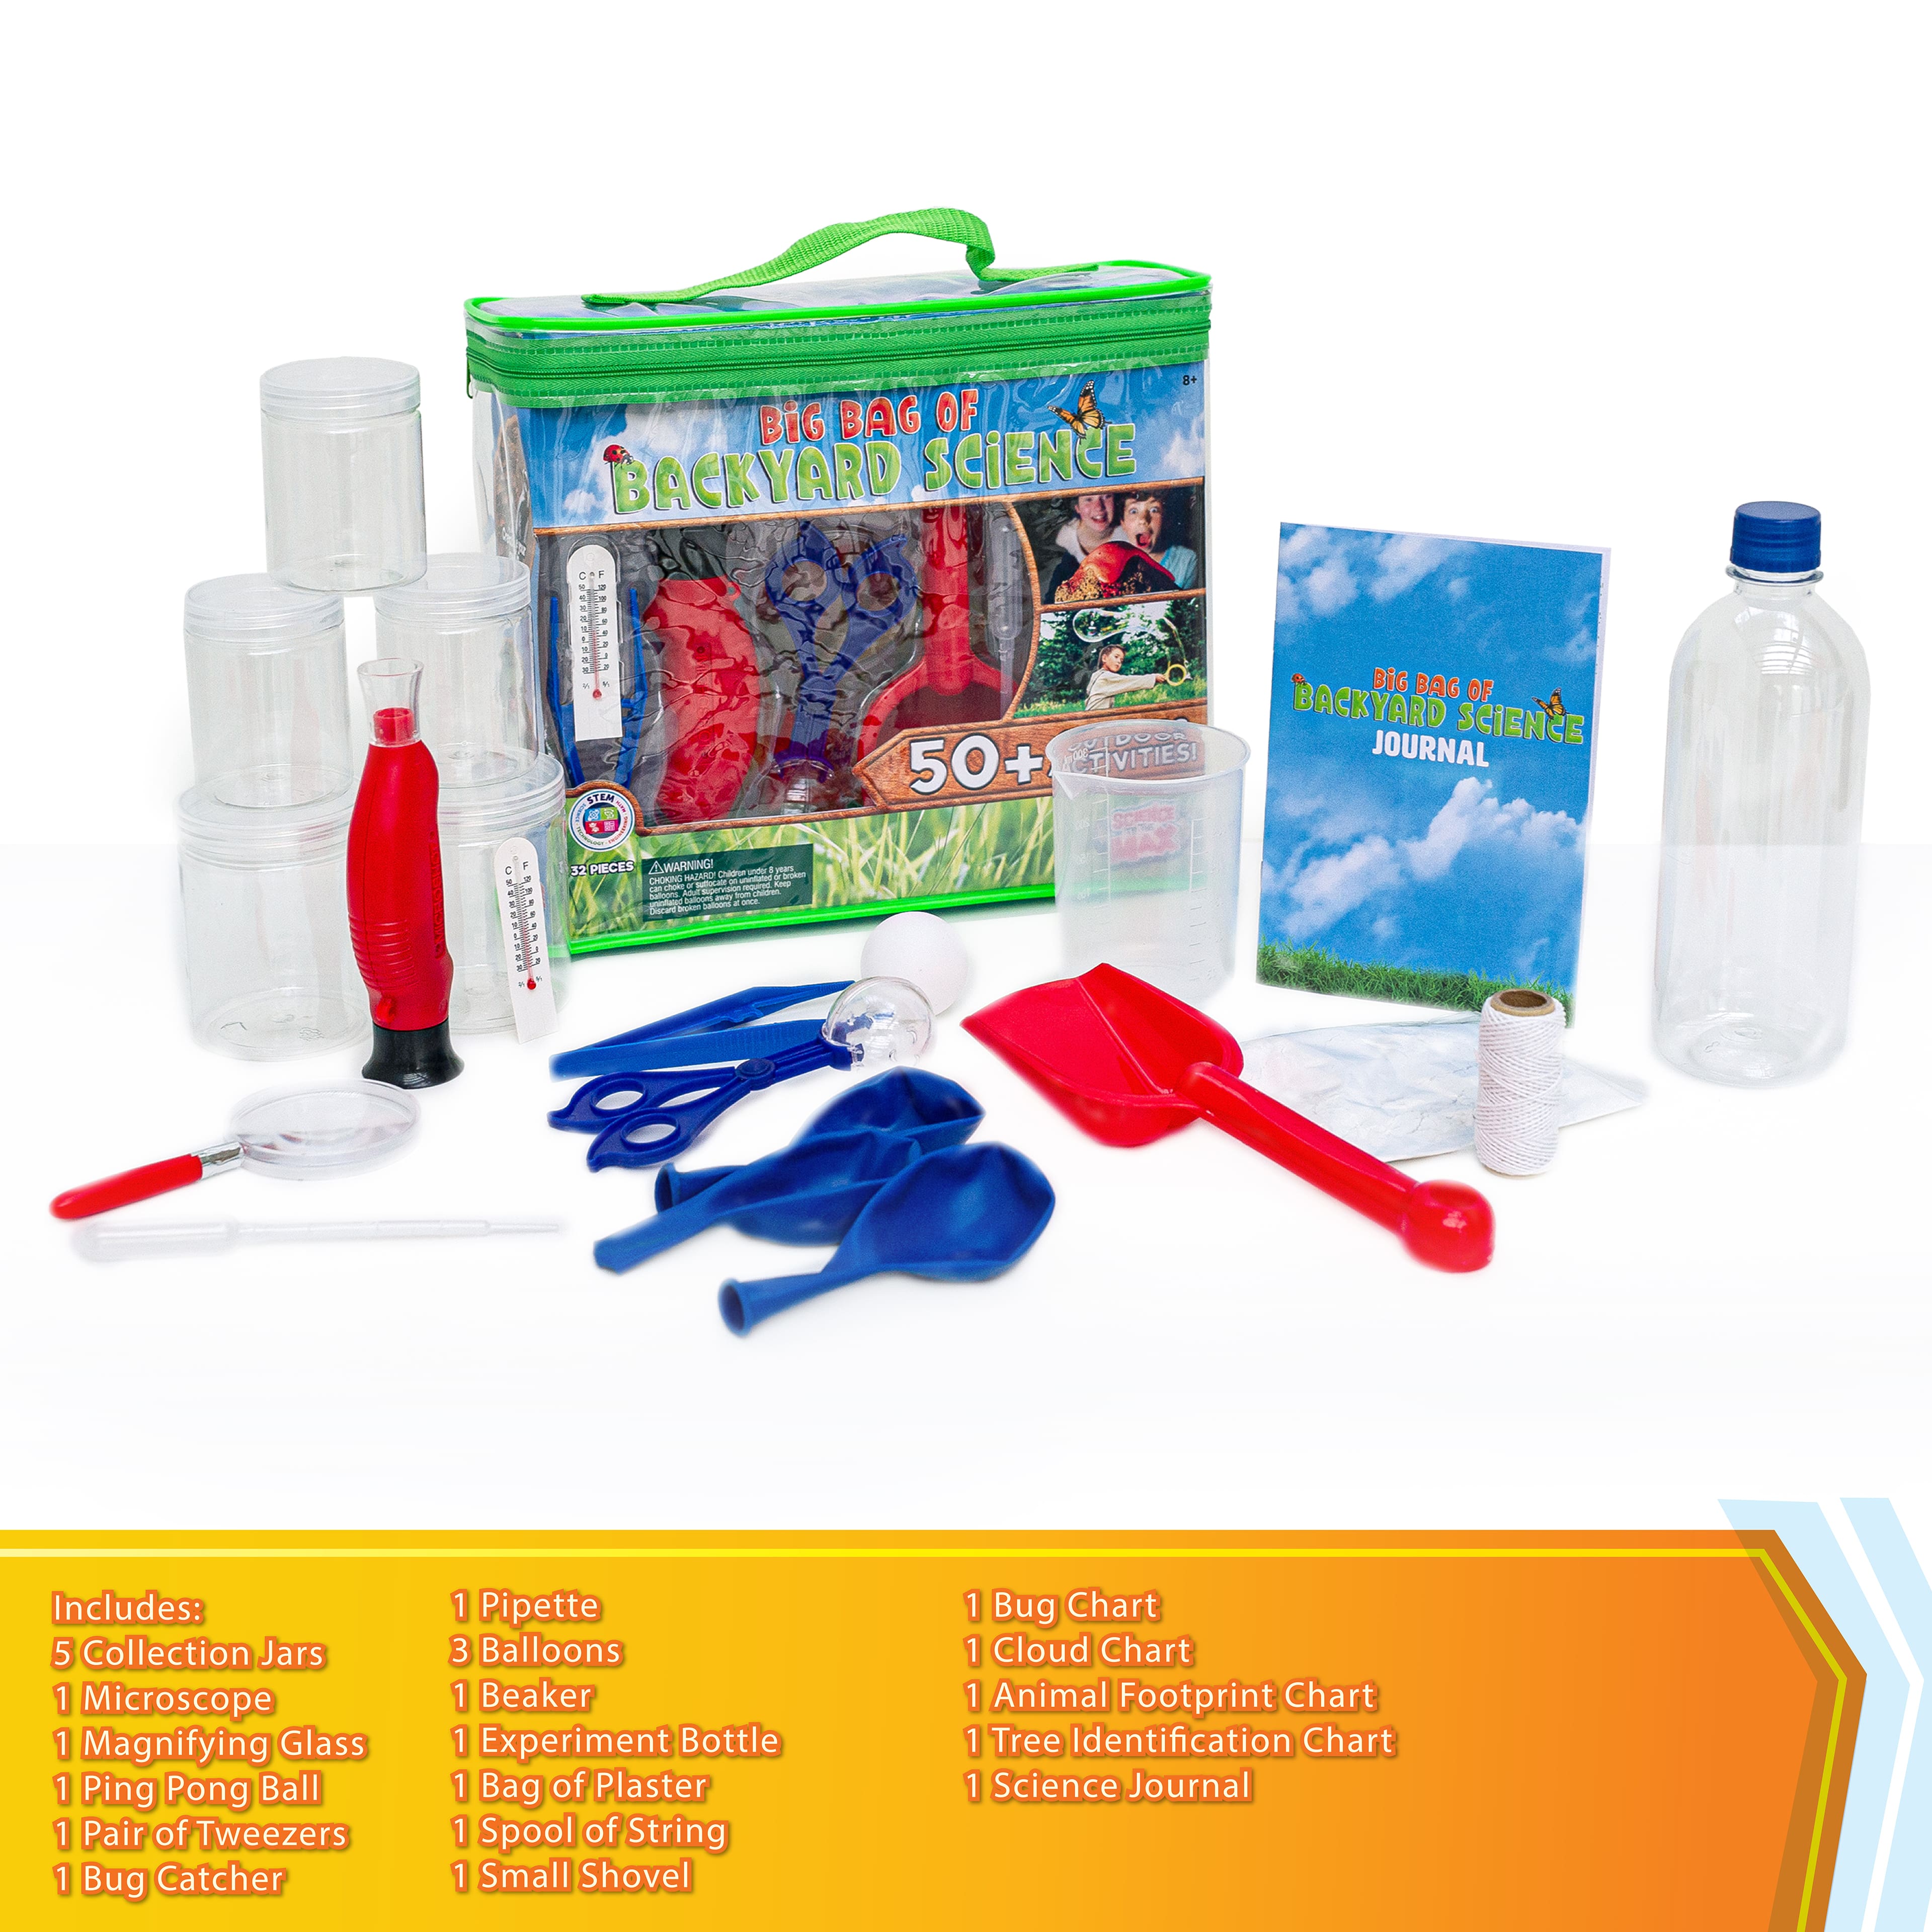 Be Amazing!&#x2122; Toys Science to the Max&#xAE; Big Bag of Backyard Science